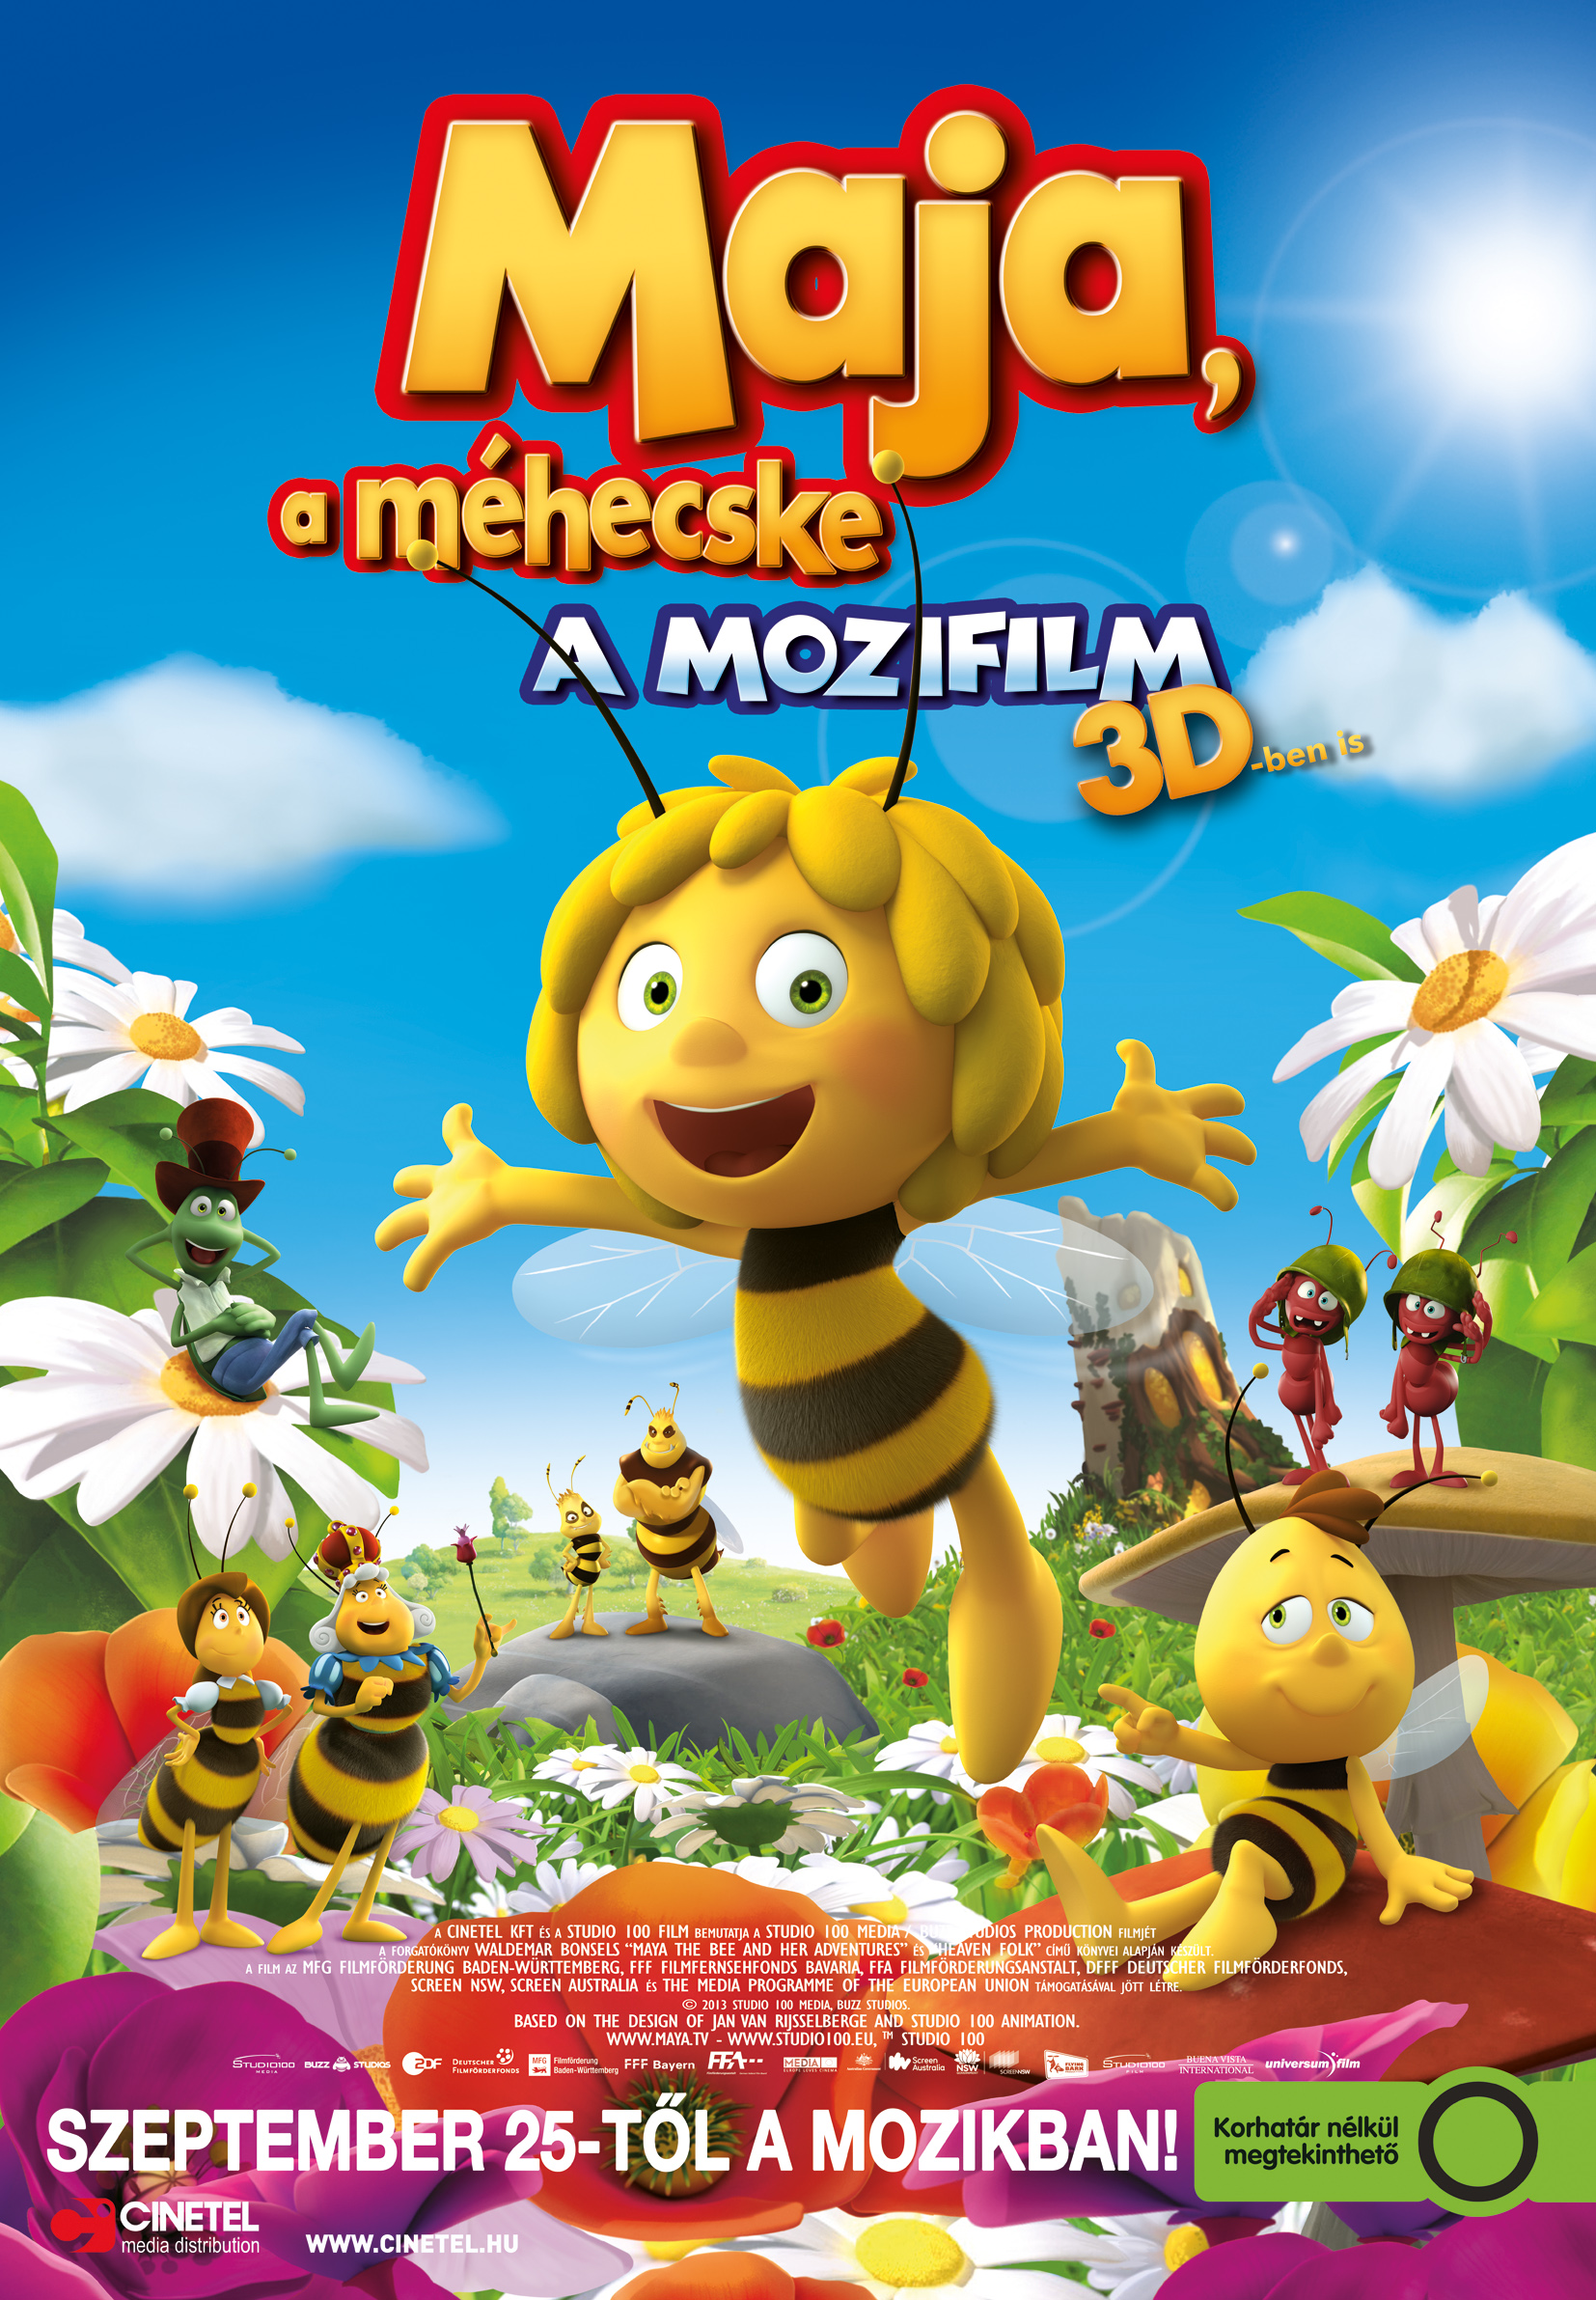 HQ Maya The Bee Movie Wallpapers | File 1546.21Kb